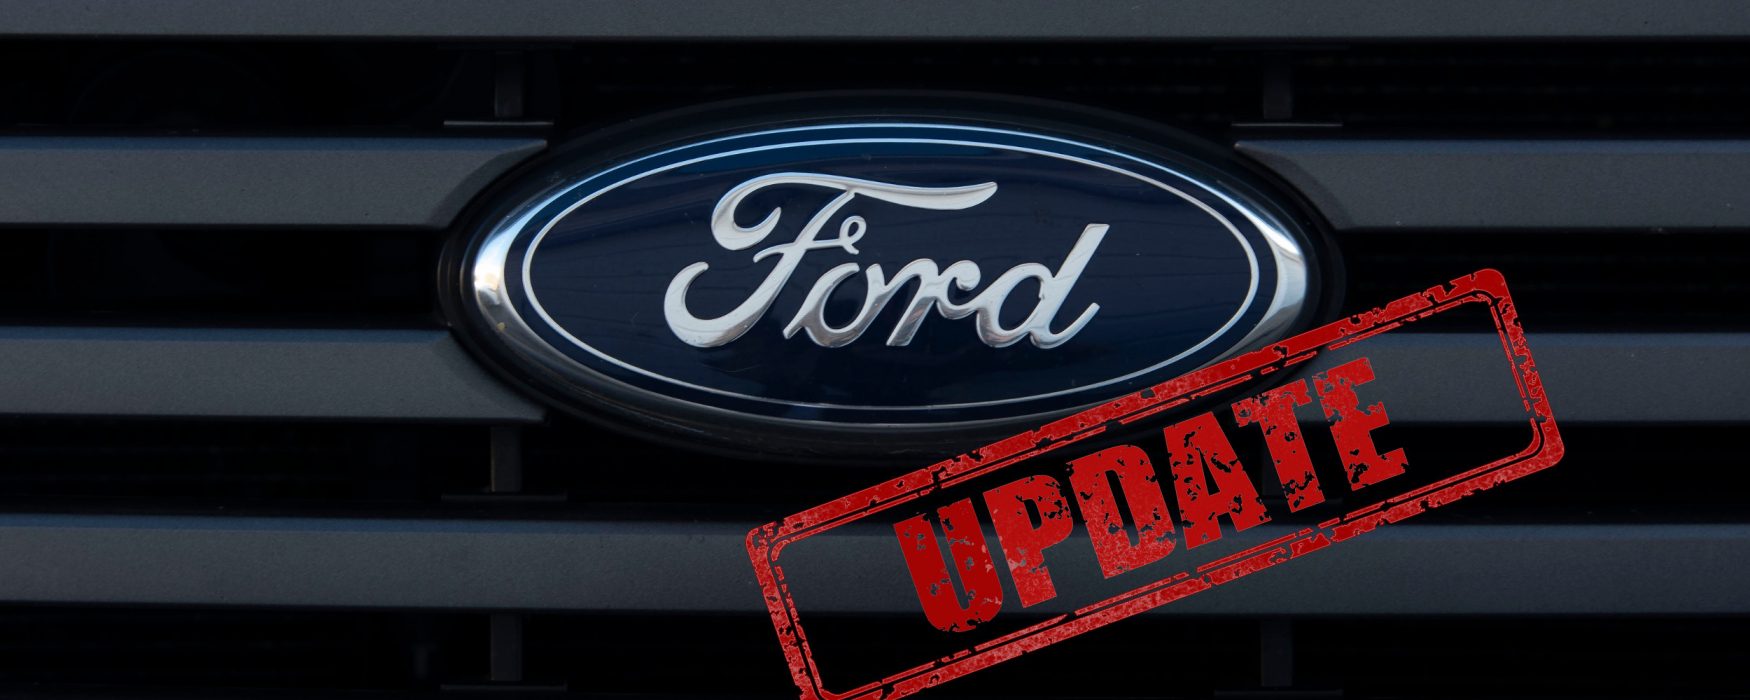 Ford Update graphic